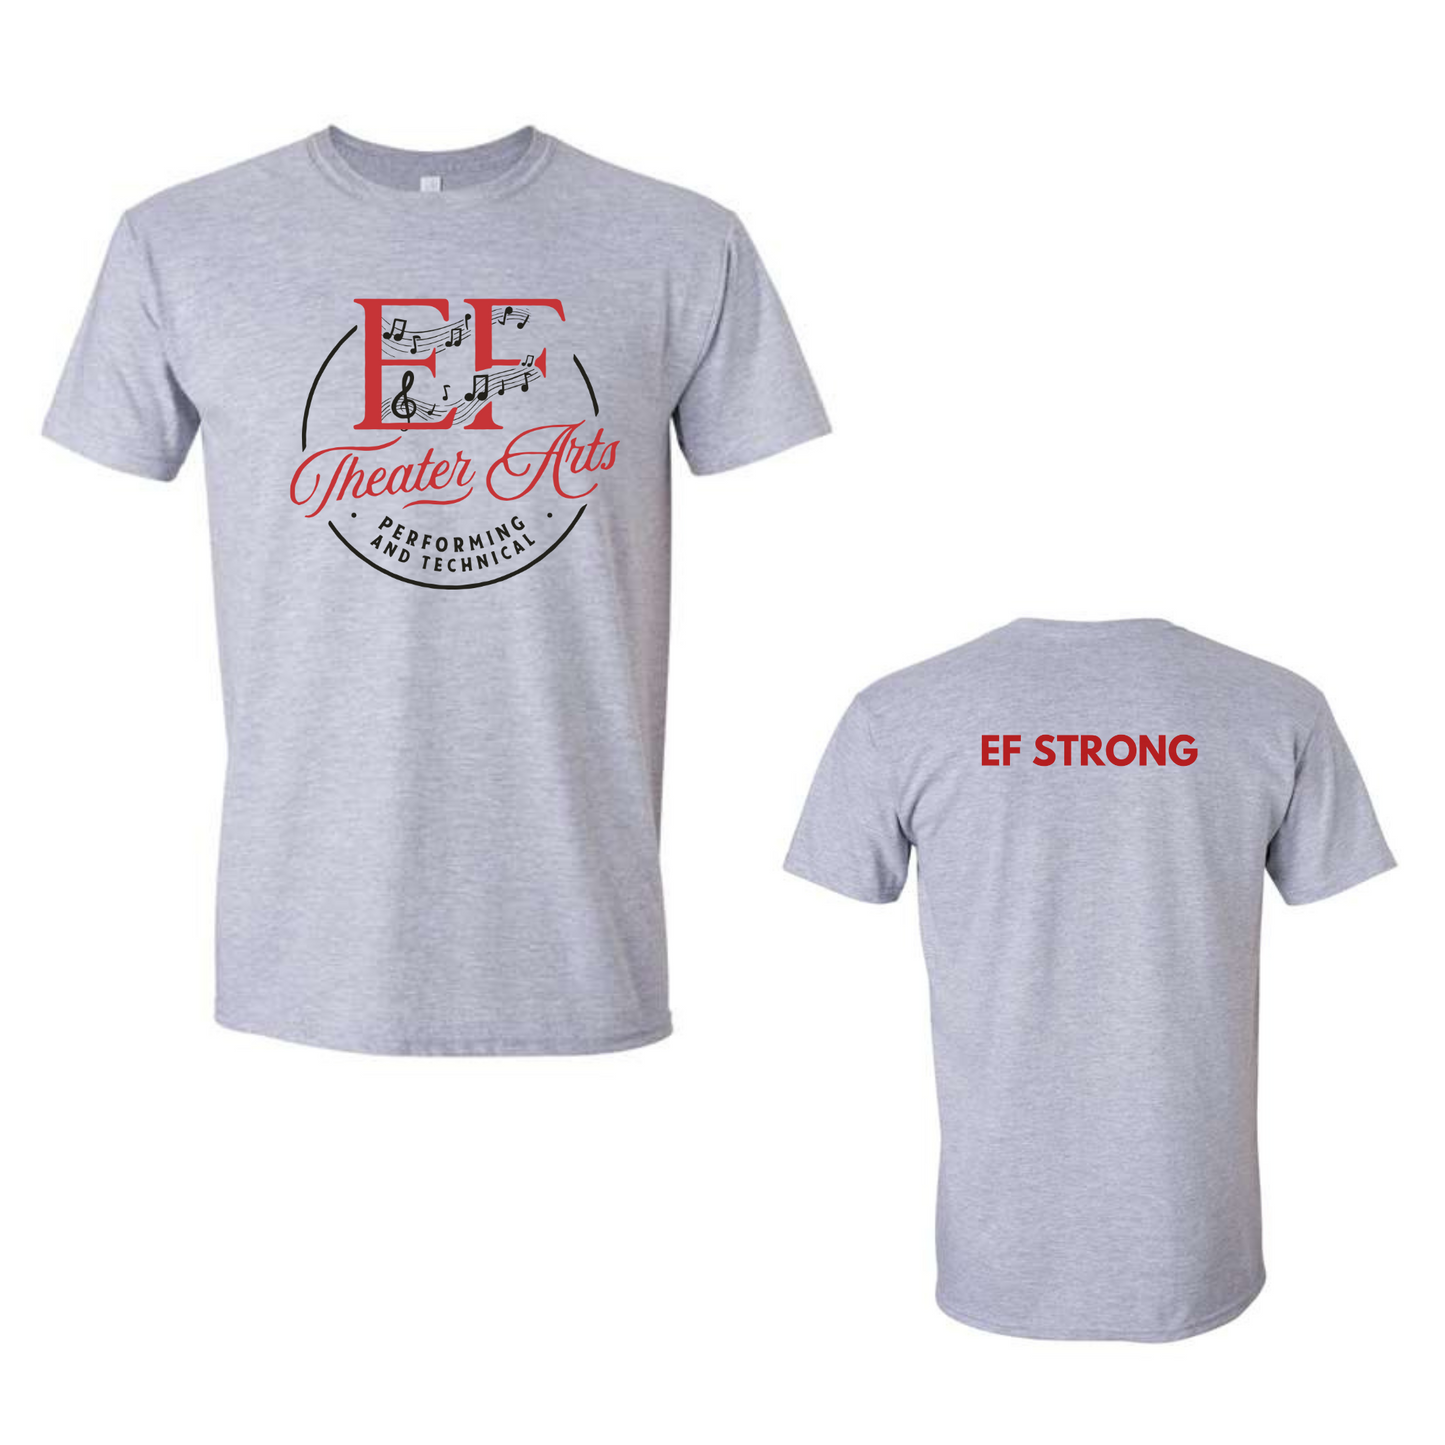 EF Theater Arts and Technical Fundraiser Tee- GREY